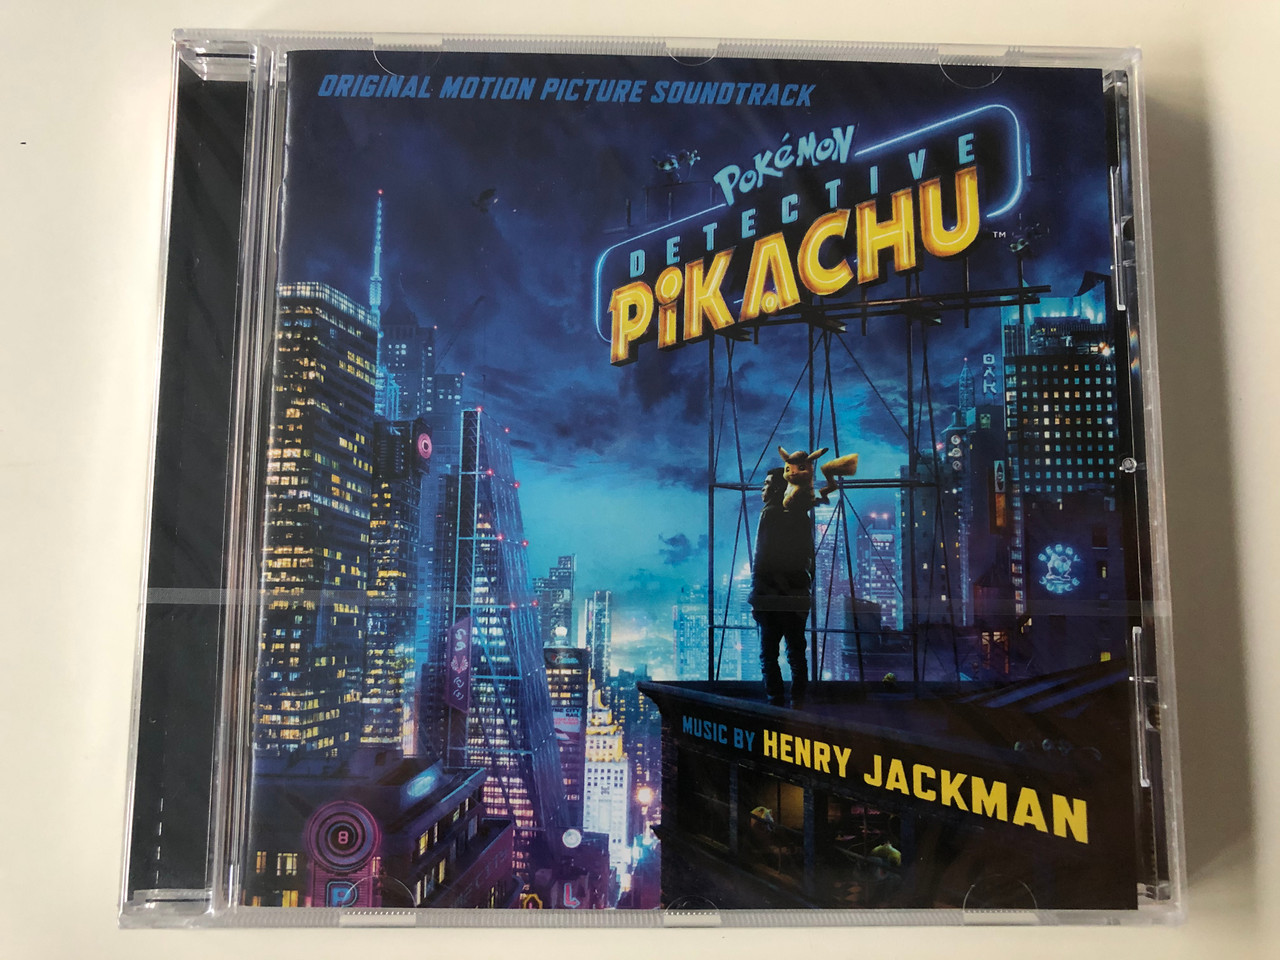 Pikachu　2019　Music　Jackman　by　‎/　My　Henry　‎Audio　19075943872　Sony　(Original　CD　Bible　in　Detective　Pokémon:　Picture　Classical　Motion　Soundtrack)　Language